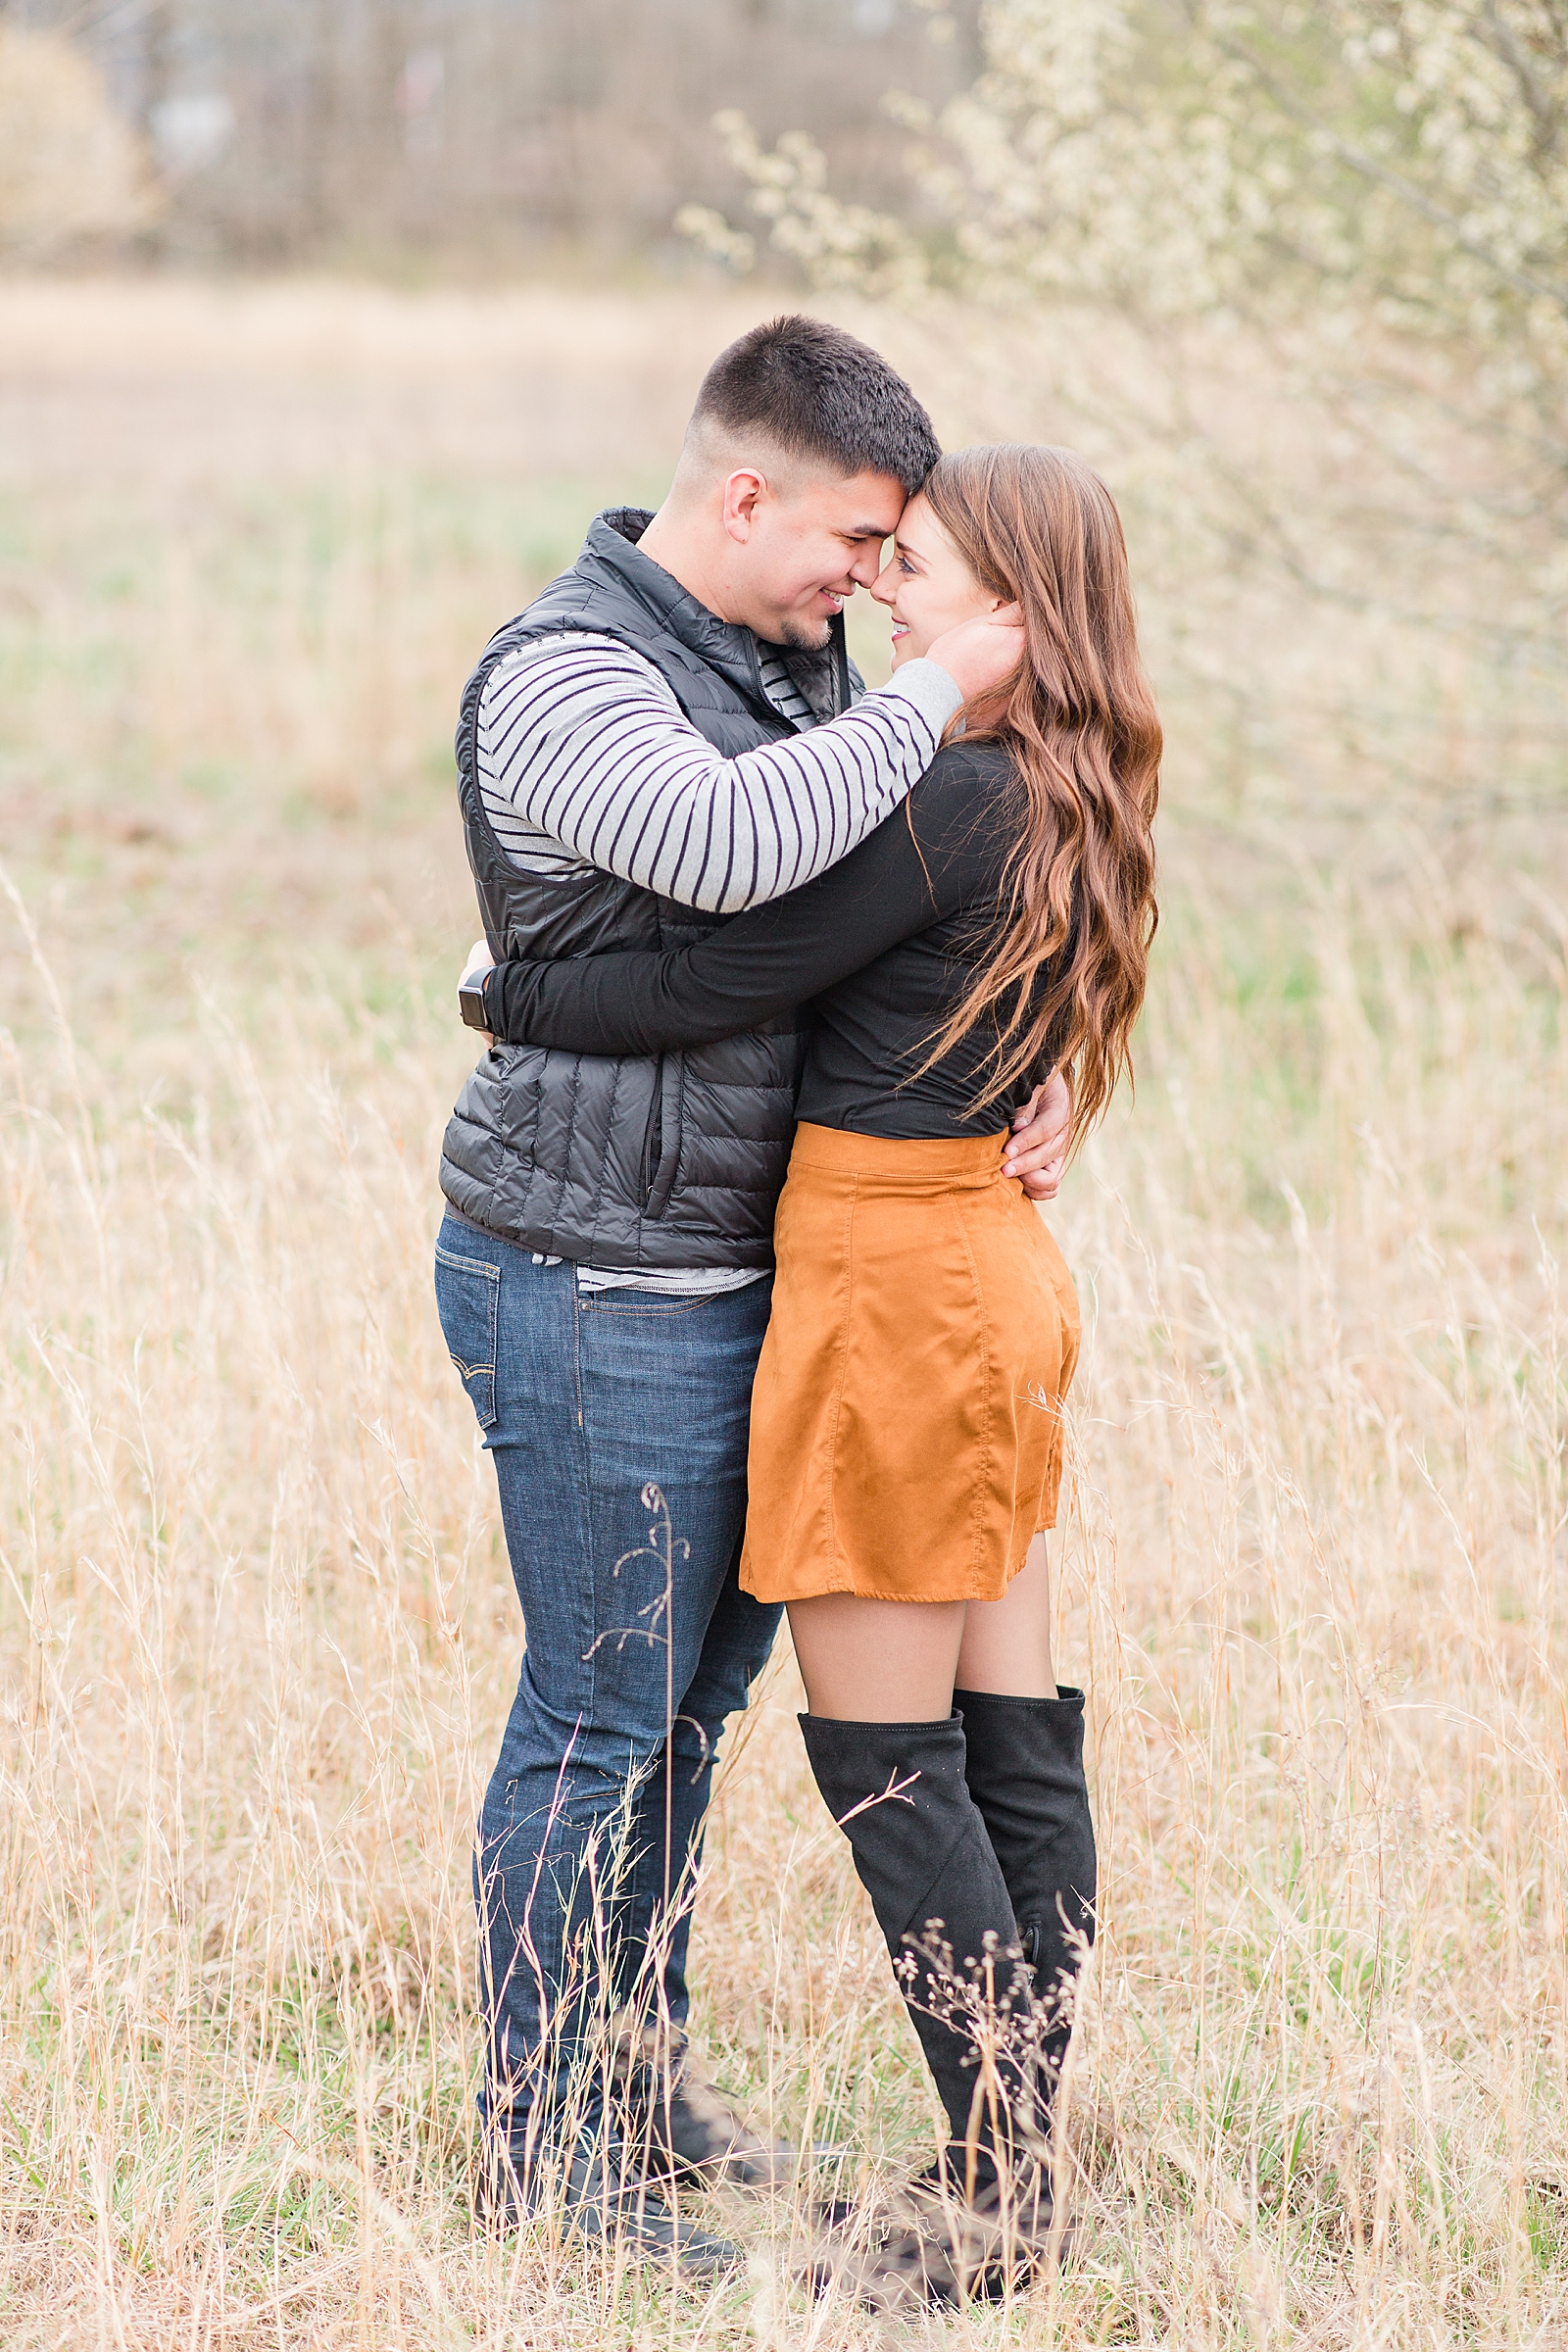 Andrews NC Spring Session Couple nose to nose in field of tall grass Photo